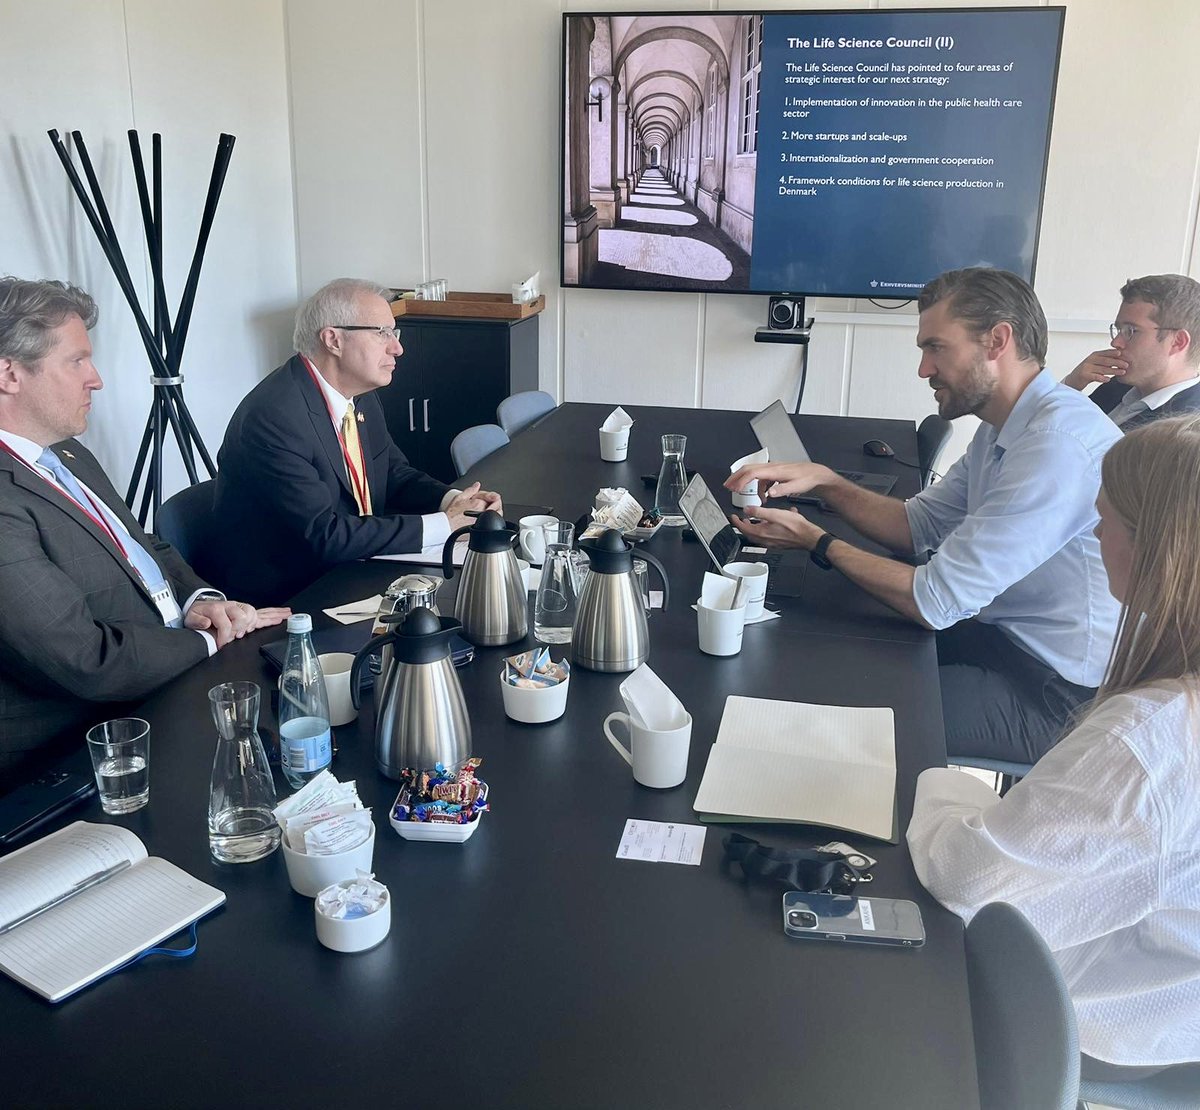 Productive dialogue with the Danish Ministry of Business, Industry & Financial Affairs to discuss innovation & growth in the #LifeSciencesSector. As part of Ontario’s life sciences strategy “Taking Life Sciences to the Next Level,” we plan to grow the sector to 85k jobs by 2030.